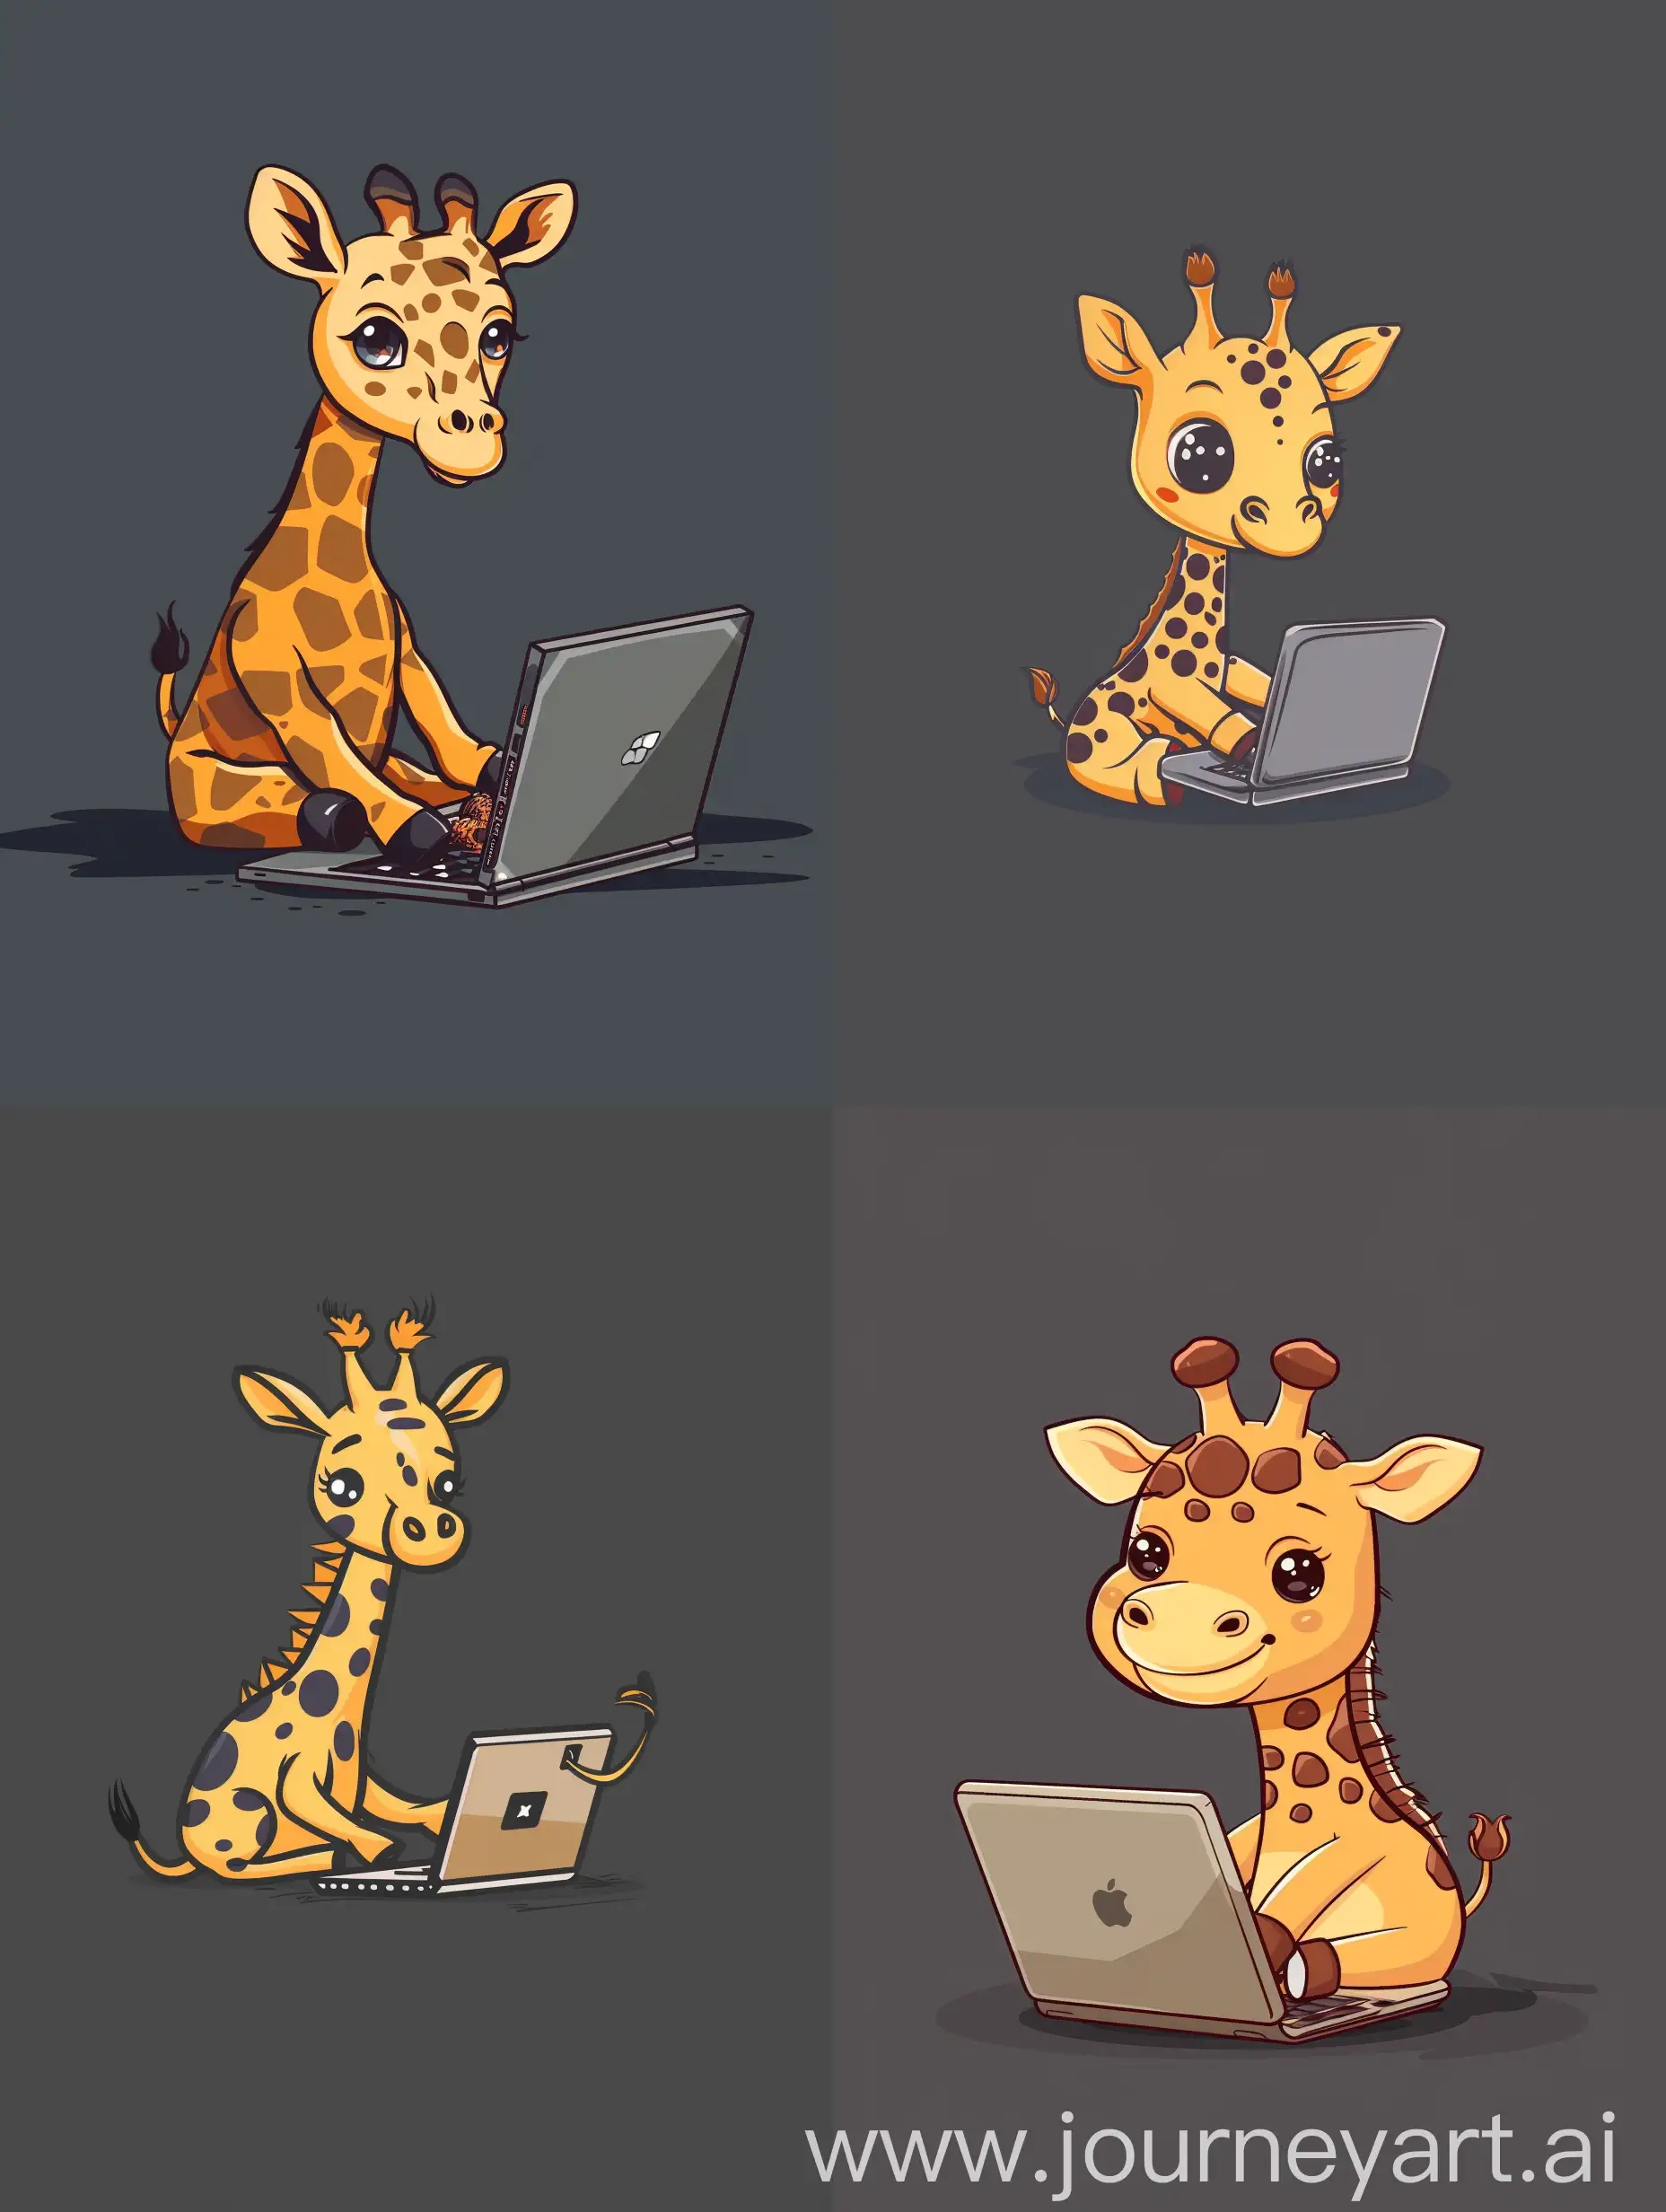 Adorable-Giraffe-Playing-on-Laptop-in-Minimalistic-Thin-Line-Style